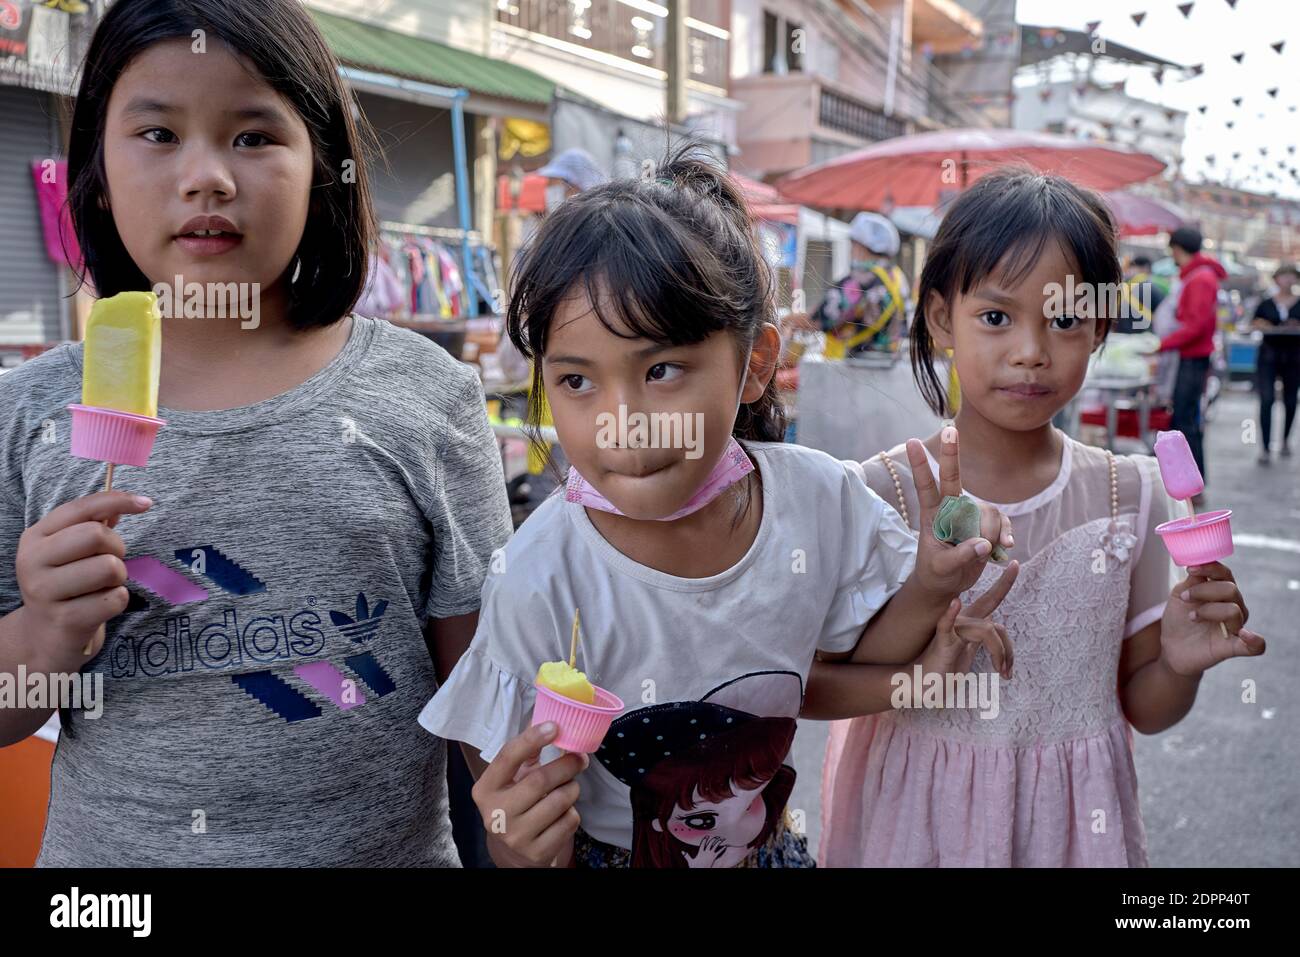 Children eating ice lollies outdoor. 3 young friends with one girl holding a fist full of money and anxious to getaway for more. Stock Photo